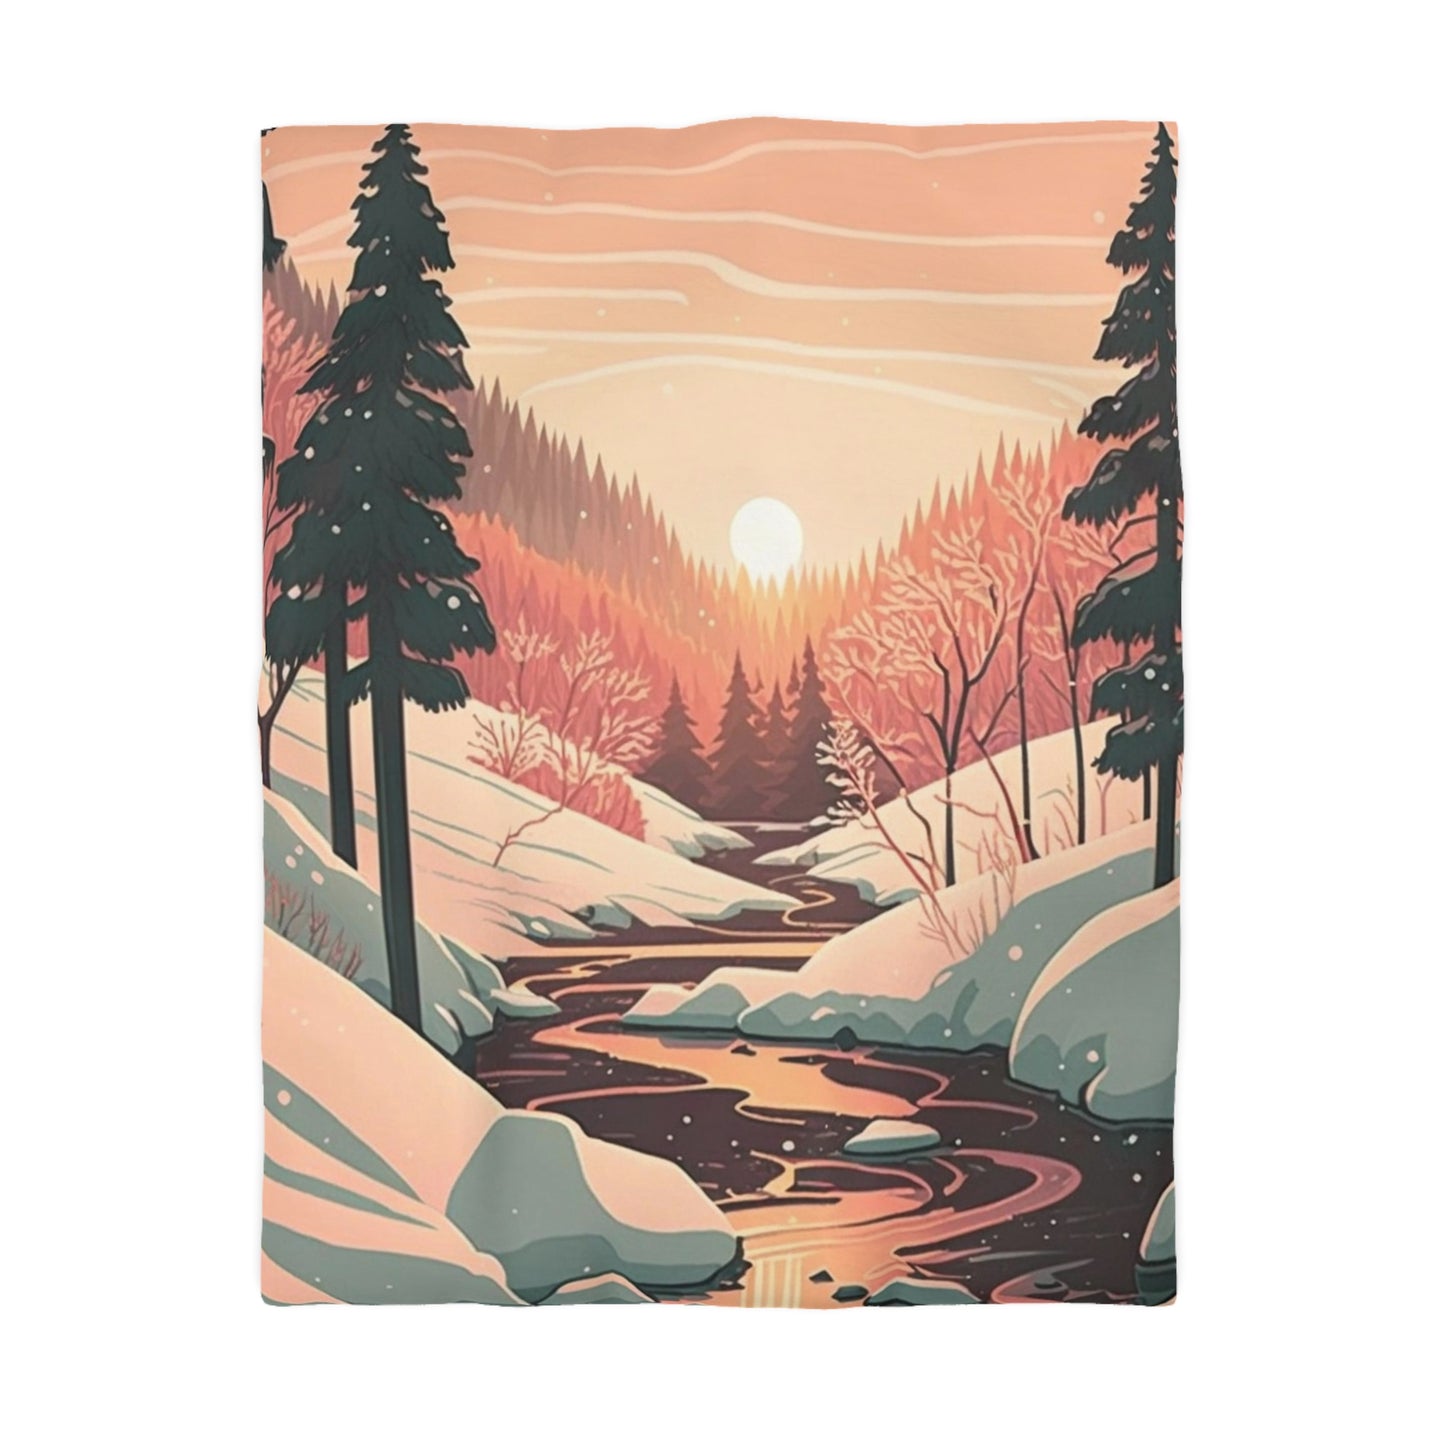 Boho Geometric Illustration of Sun Setting in Forest During Winter | Duvet Cover | Ukiyo-E Style | Harajuku | Gifts For Yourself